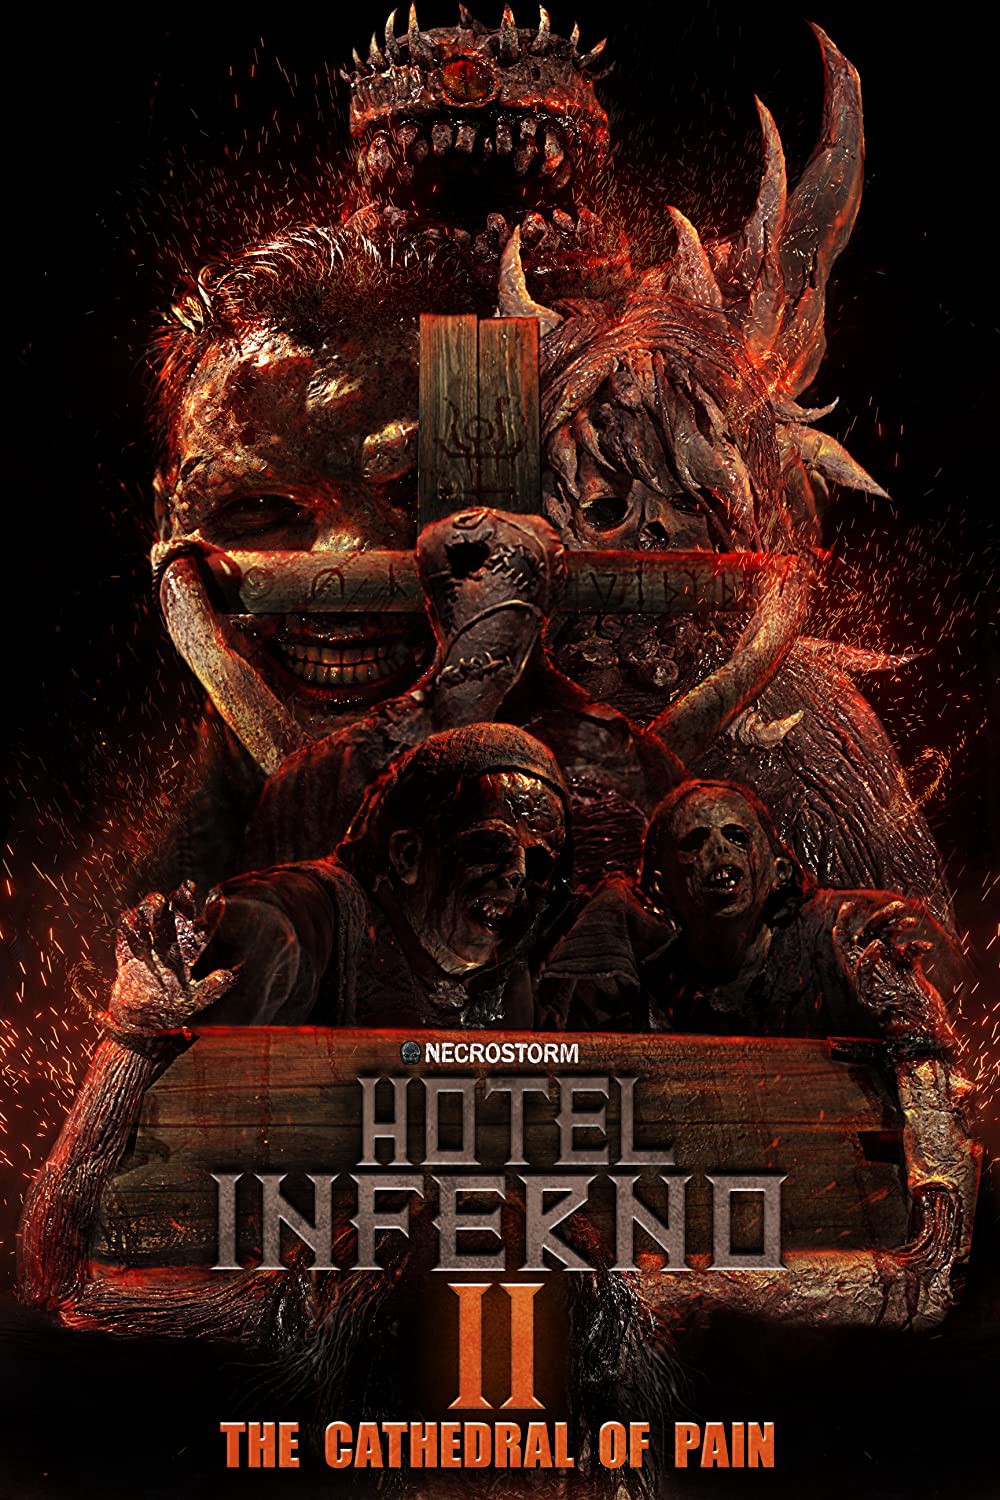 Hotel Inferno 2: The Cathedral of Pain 2017